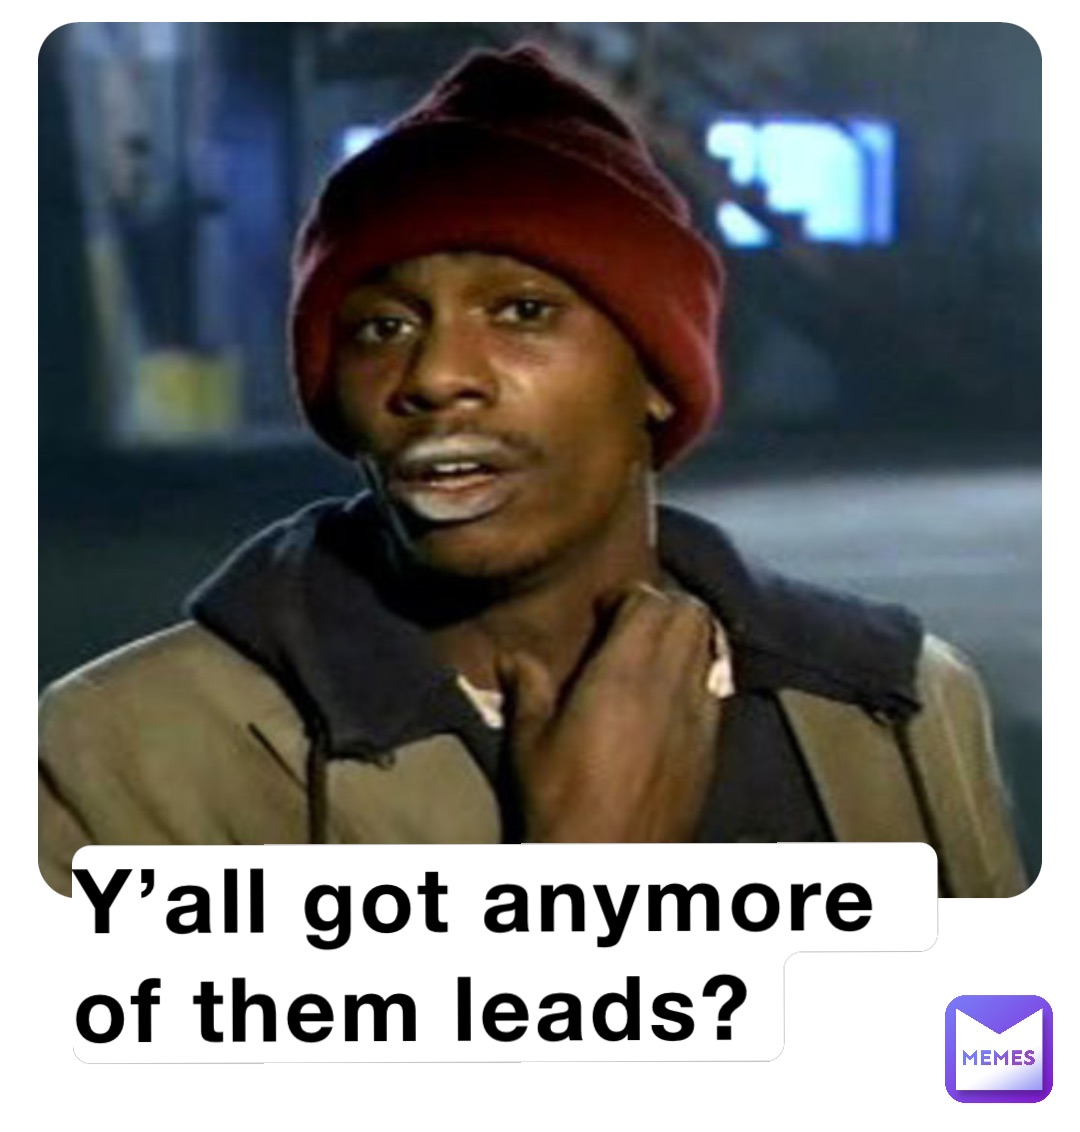 Y’all got anymore of them leads?